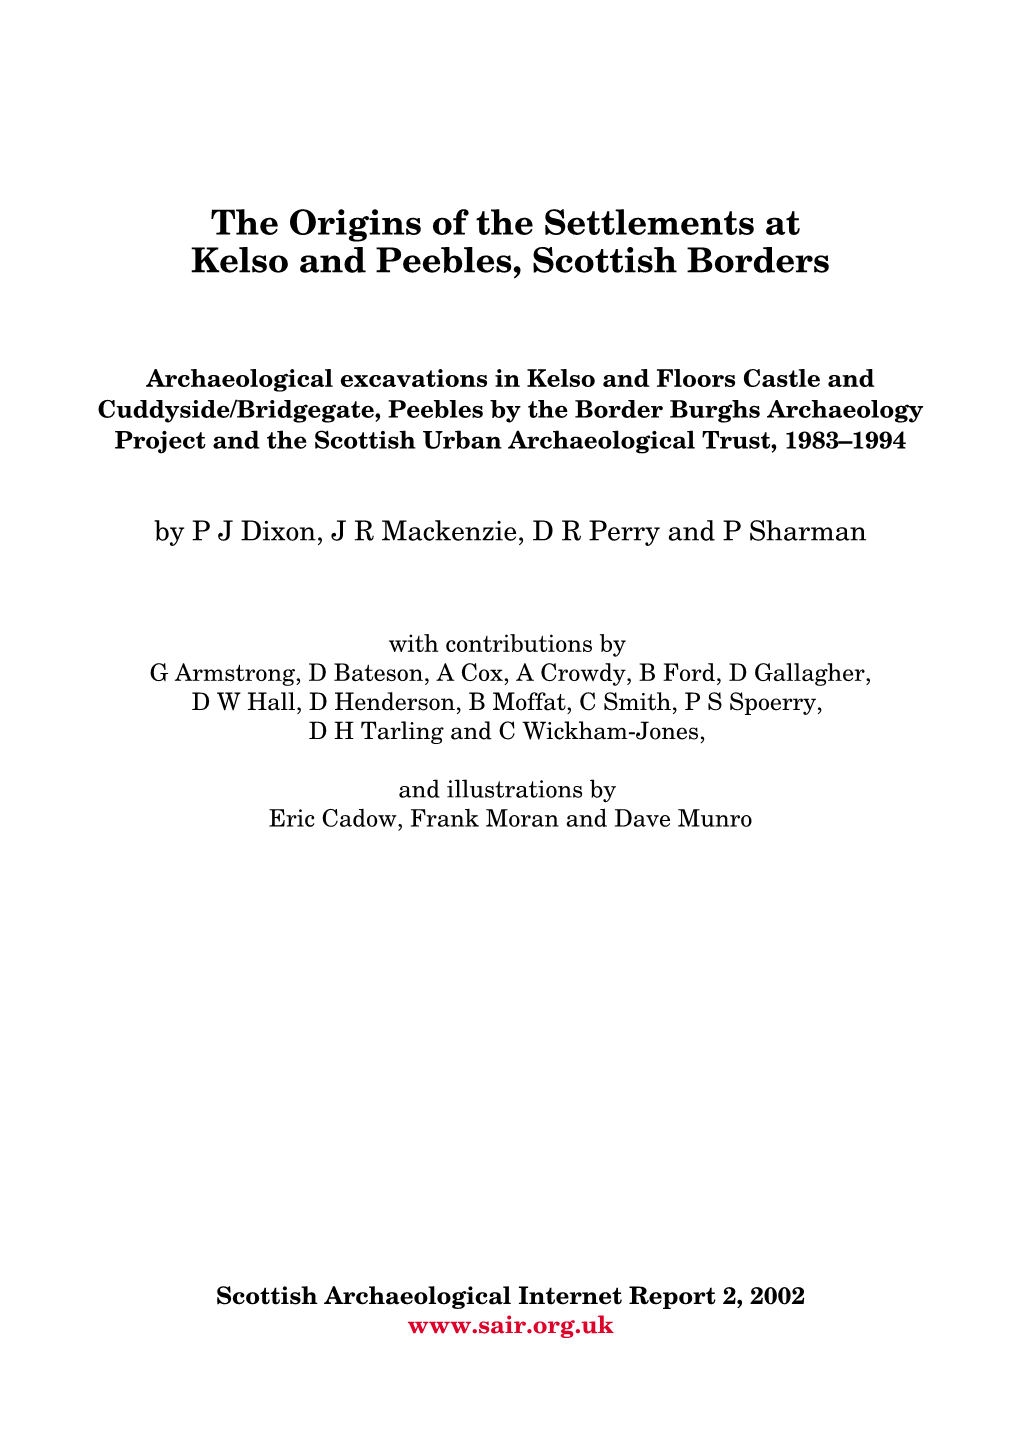 The Origins of the Settlements at Kelso and Peebles, Scottish Borders